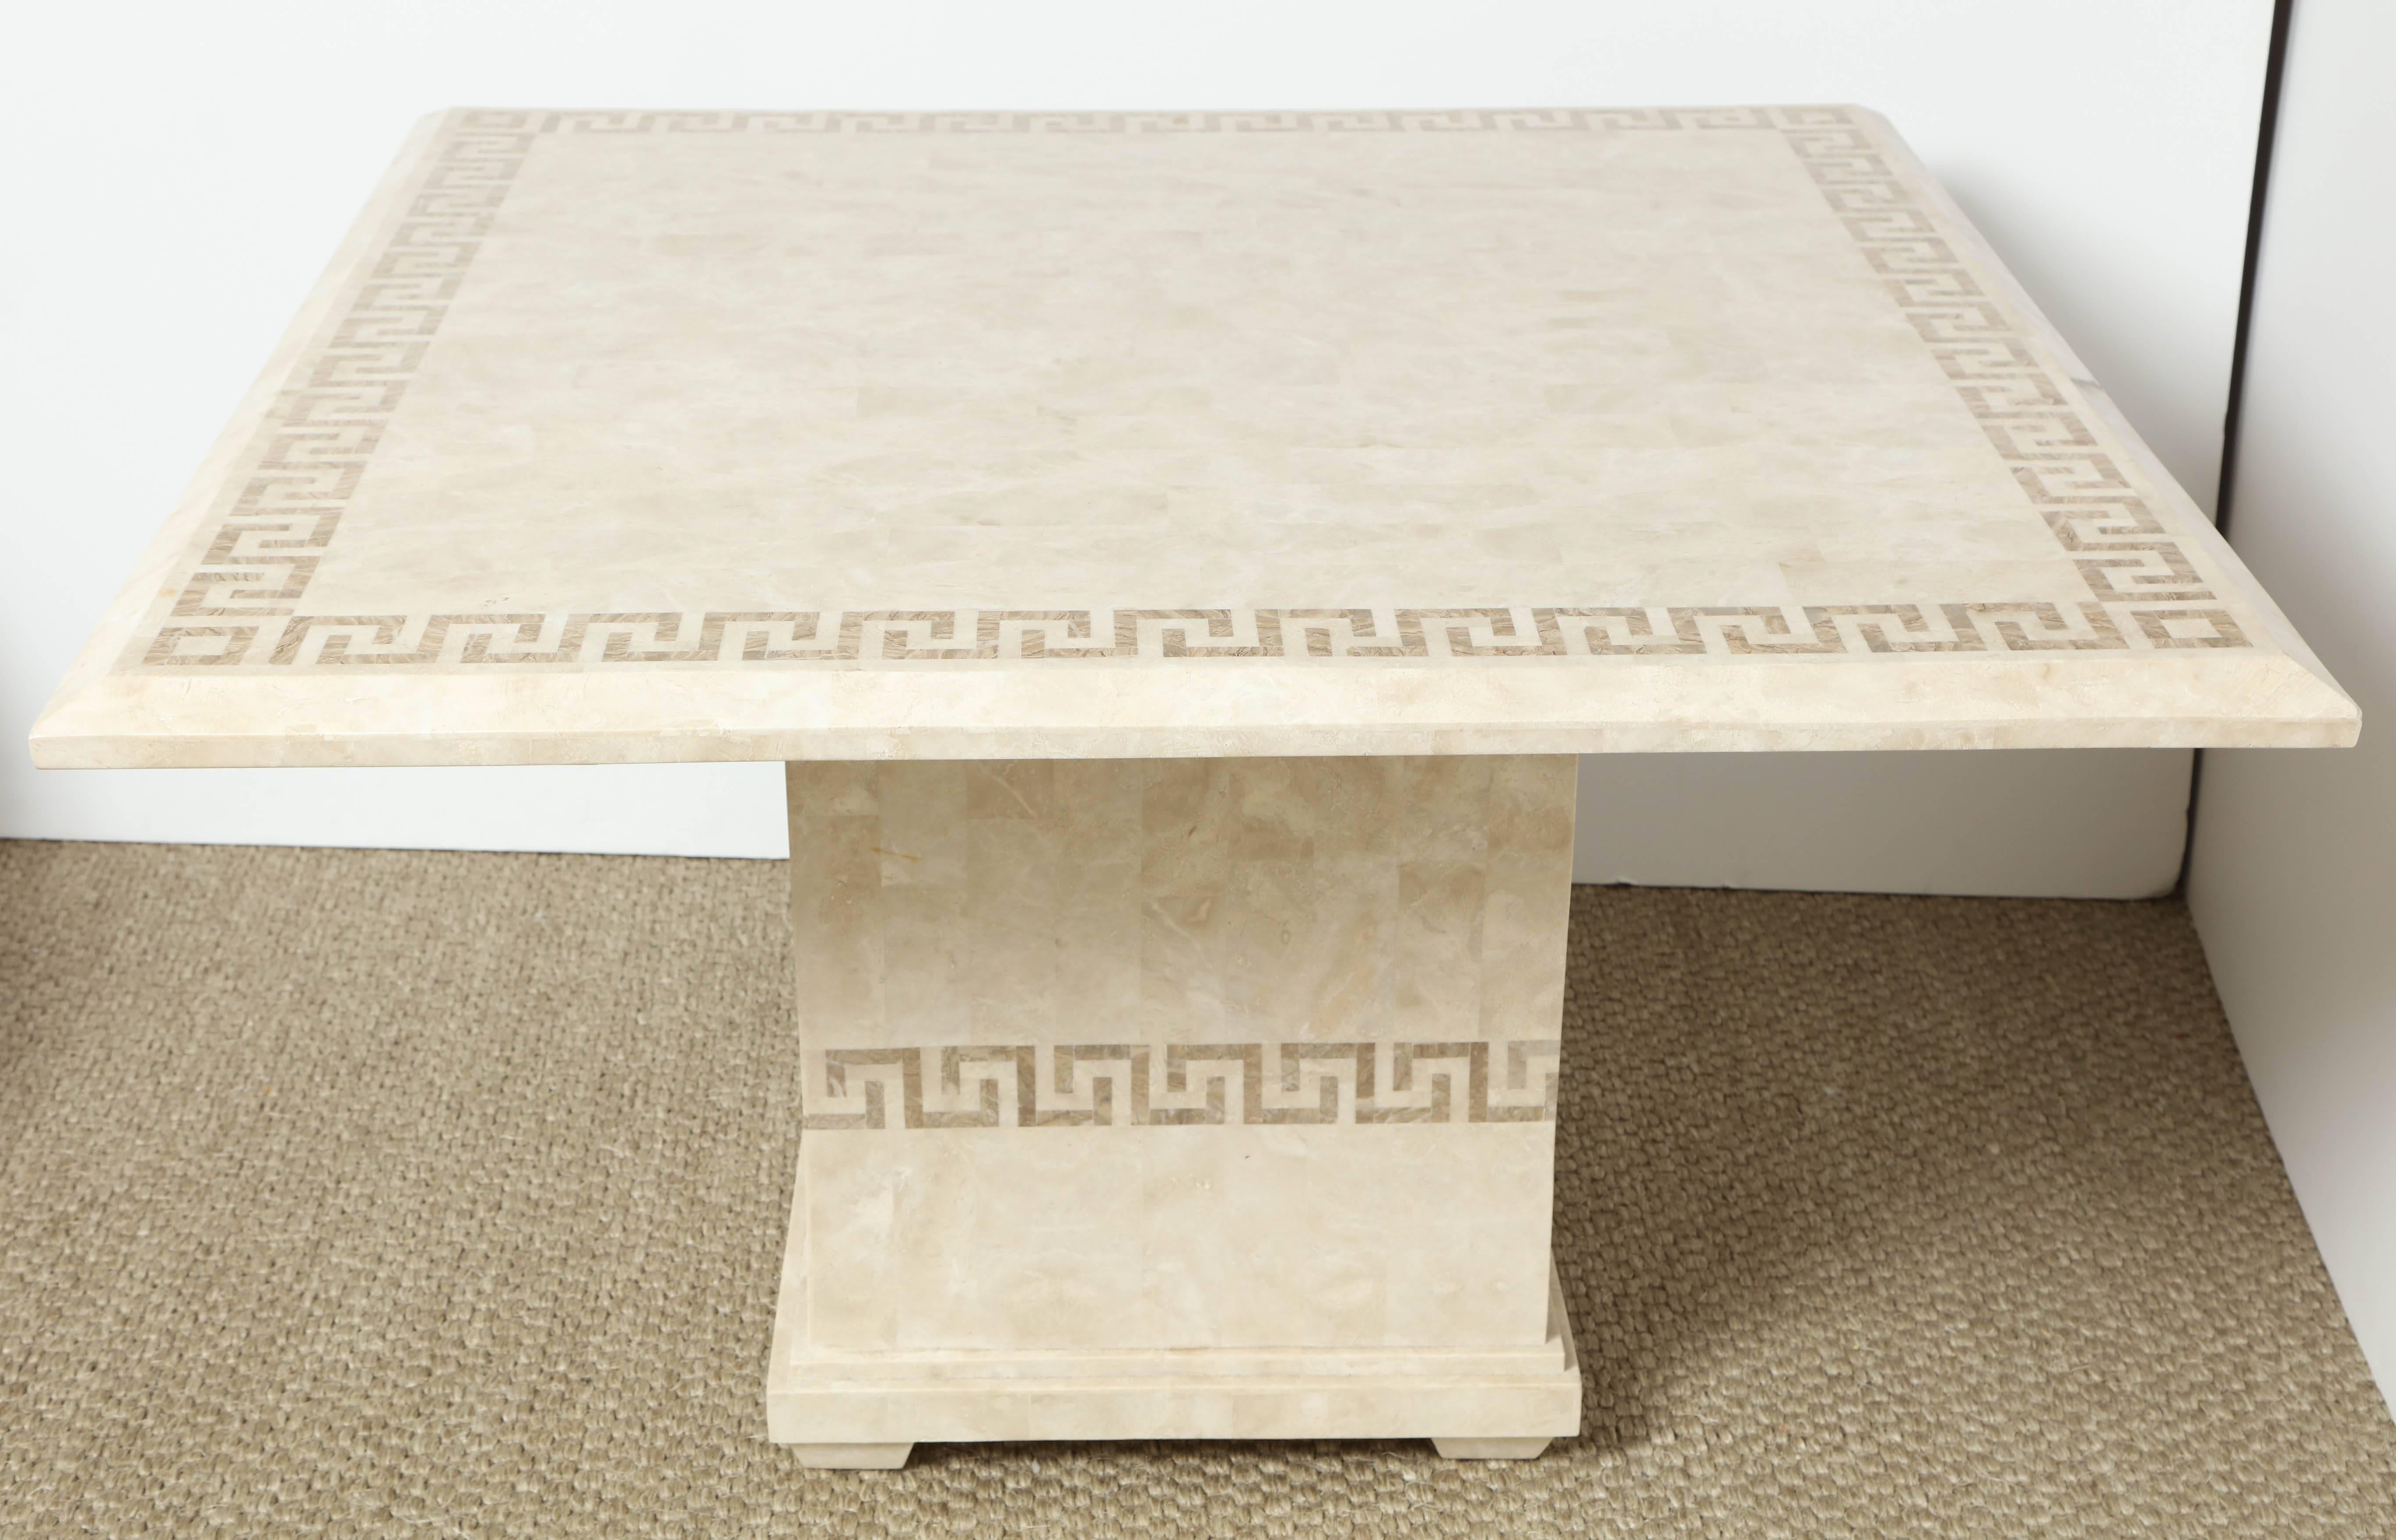 This super chic table consists of a square top with a slightly beveled edge over a square centre pedestal. It is constructed of pieces of marble over a wood base and is accented by a Greek key design on the top as well as surrounding the base. The